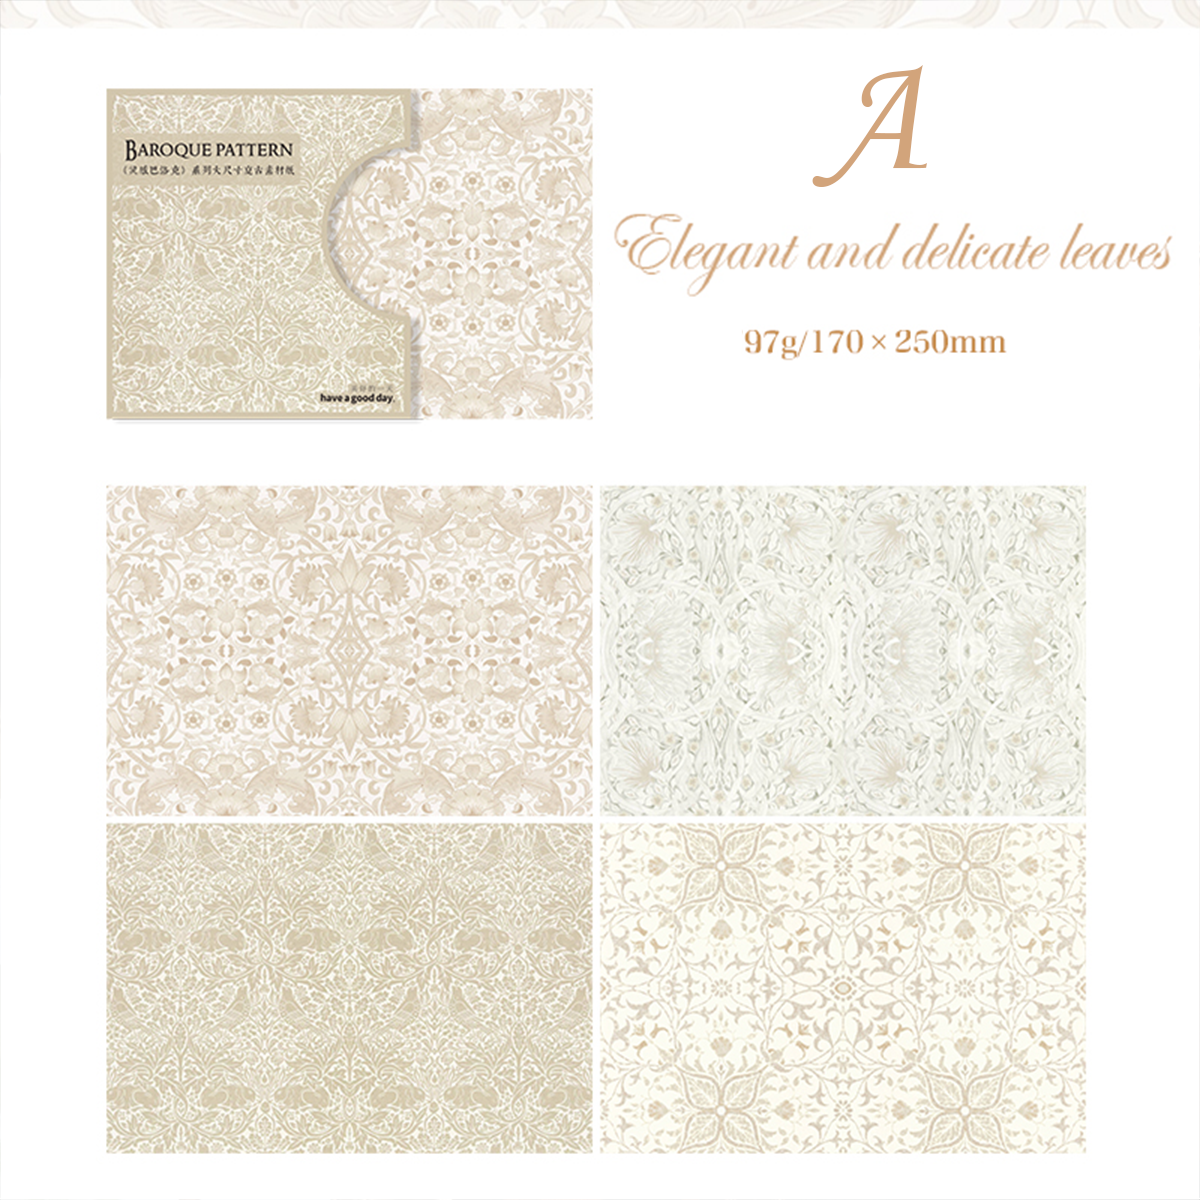 Baroque Pattern Large Size Material Paper